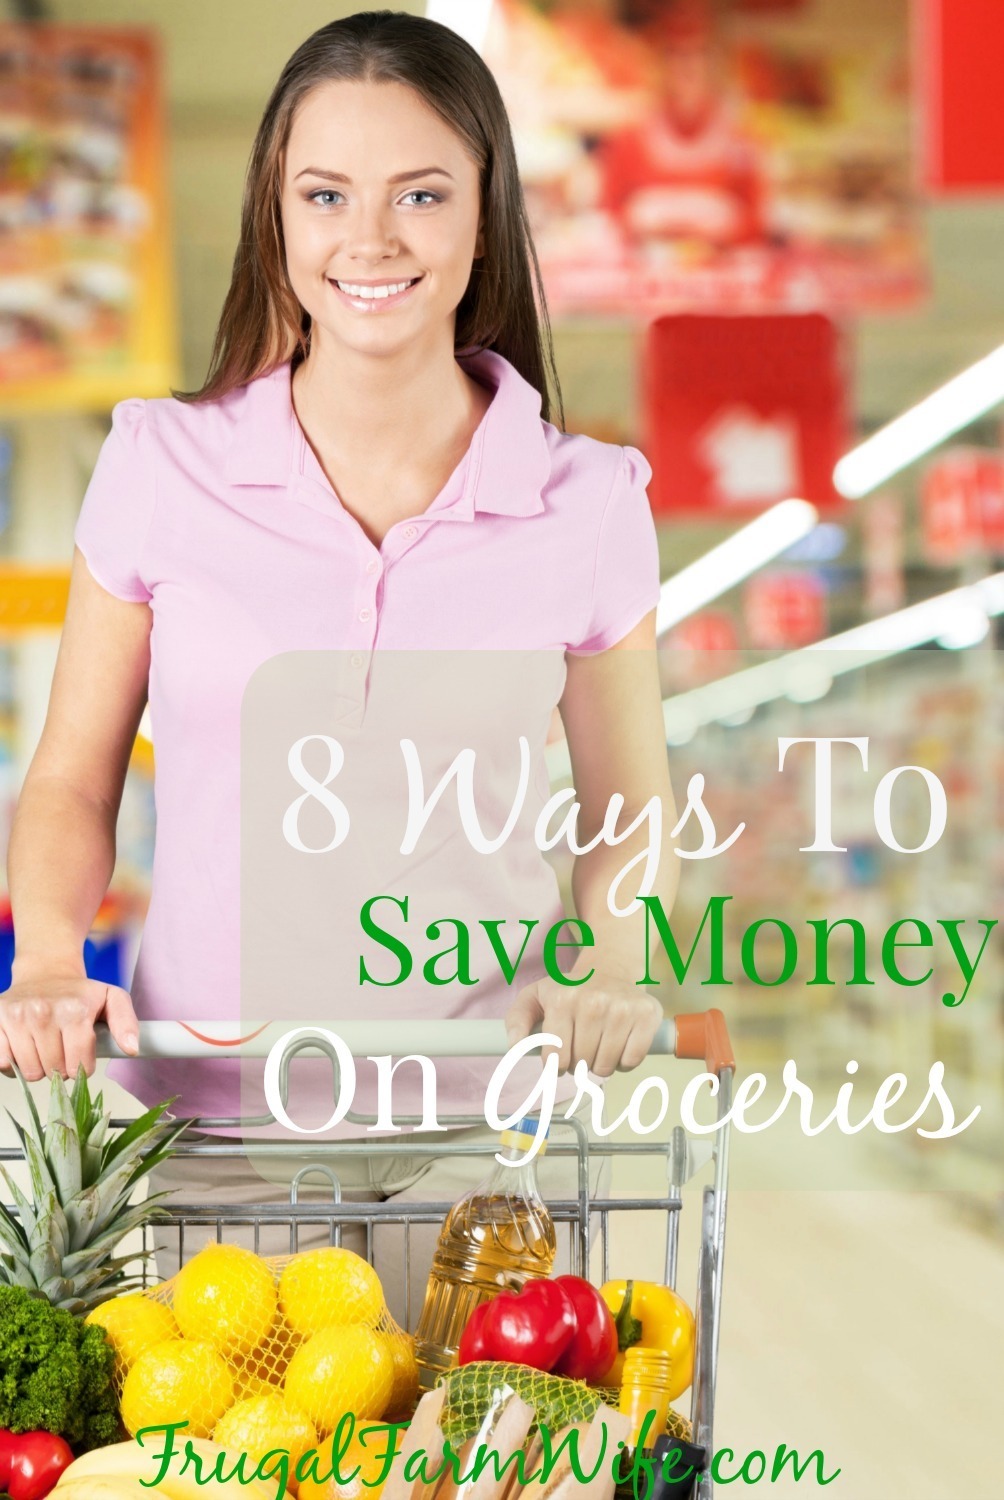 8 ways to save money on groceries